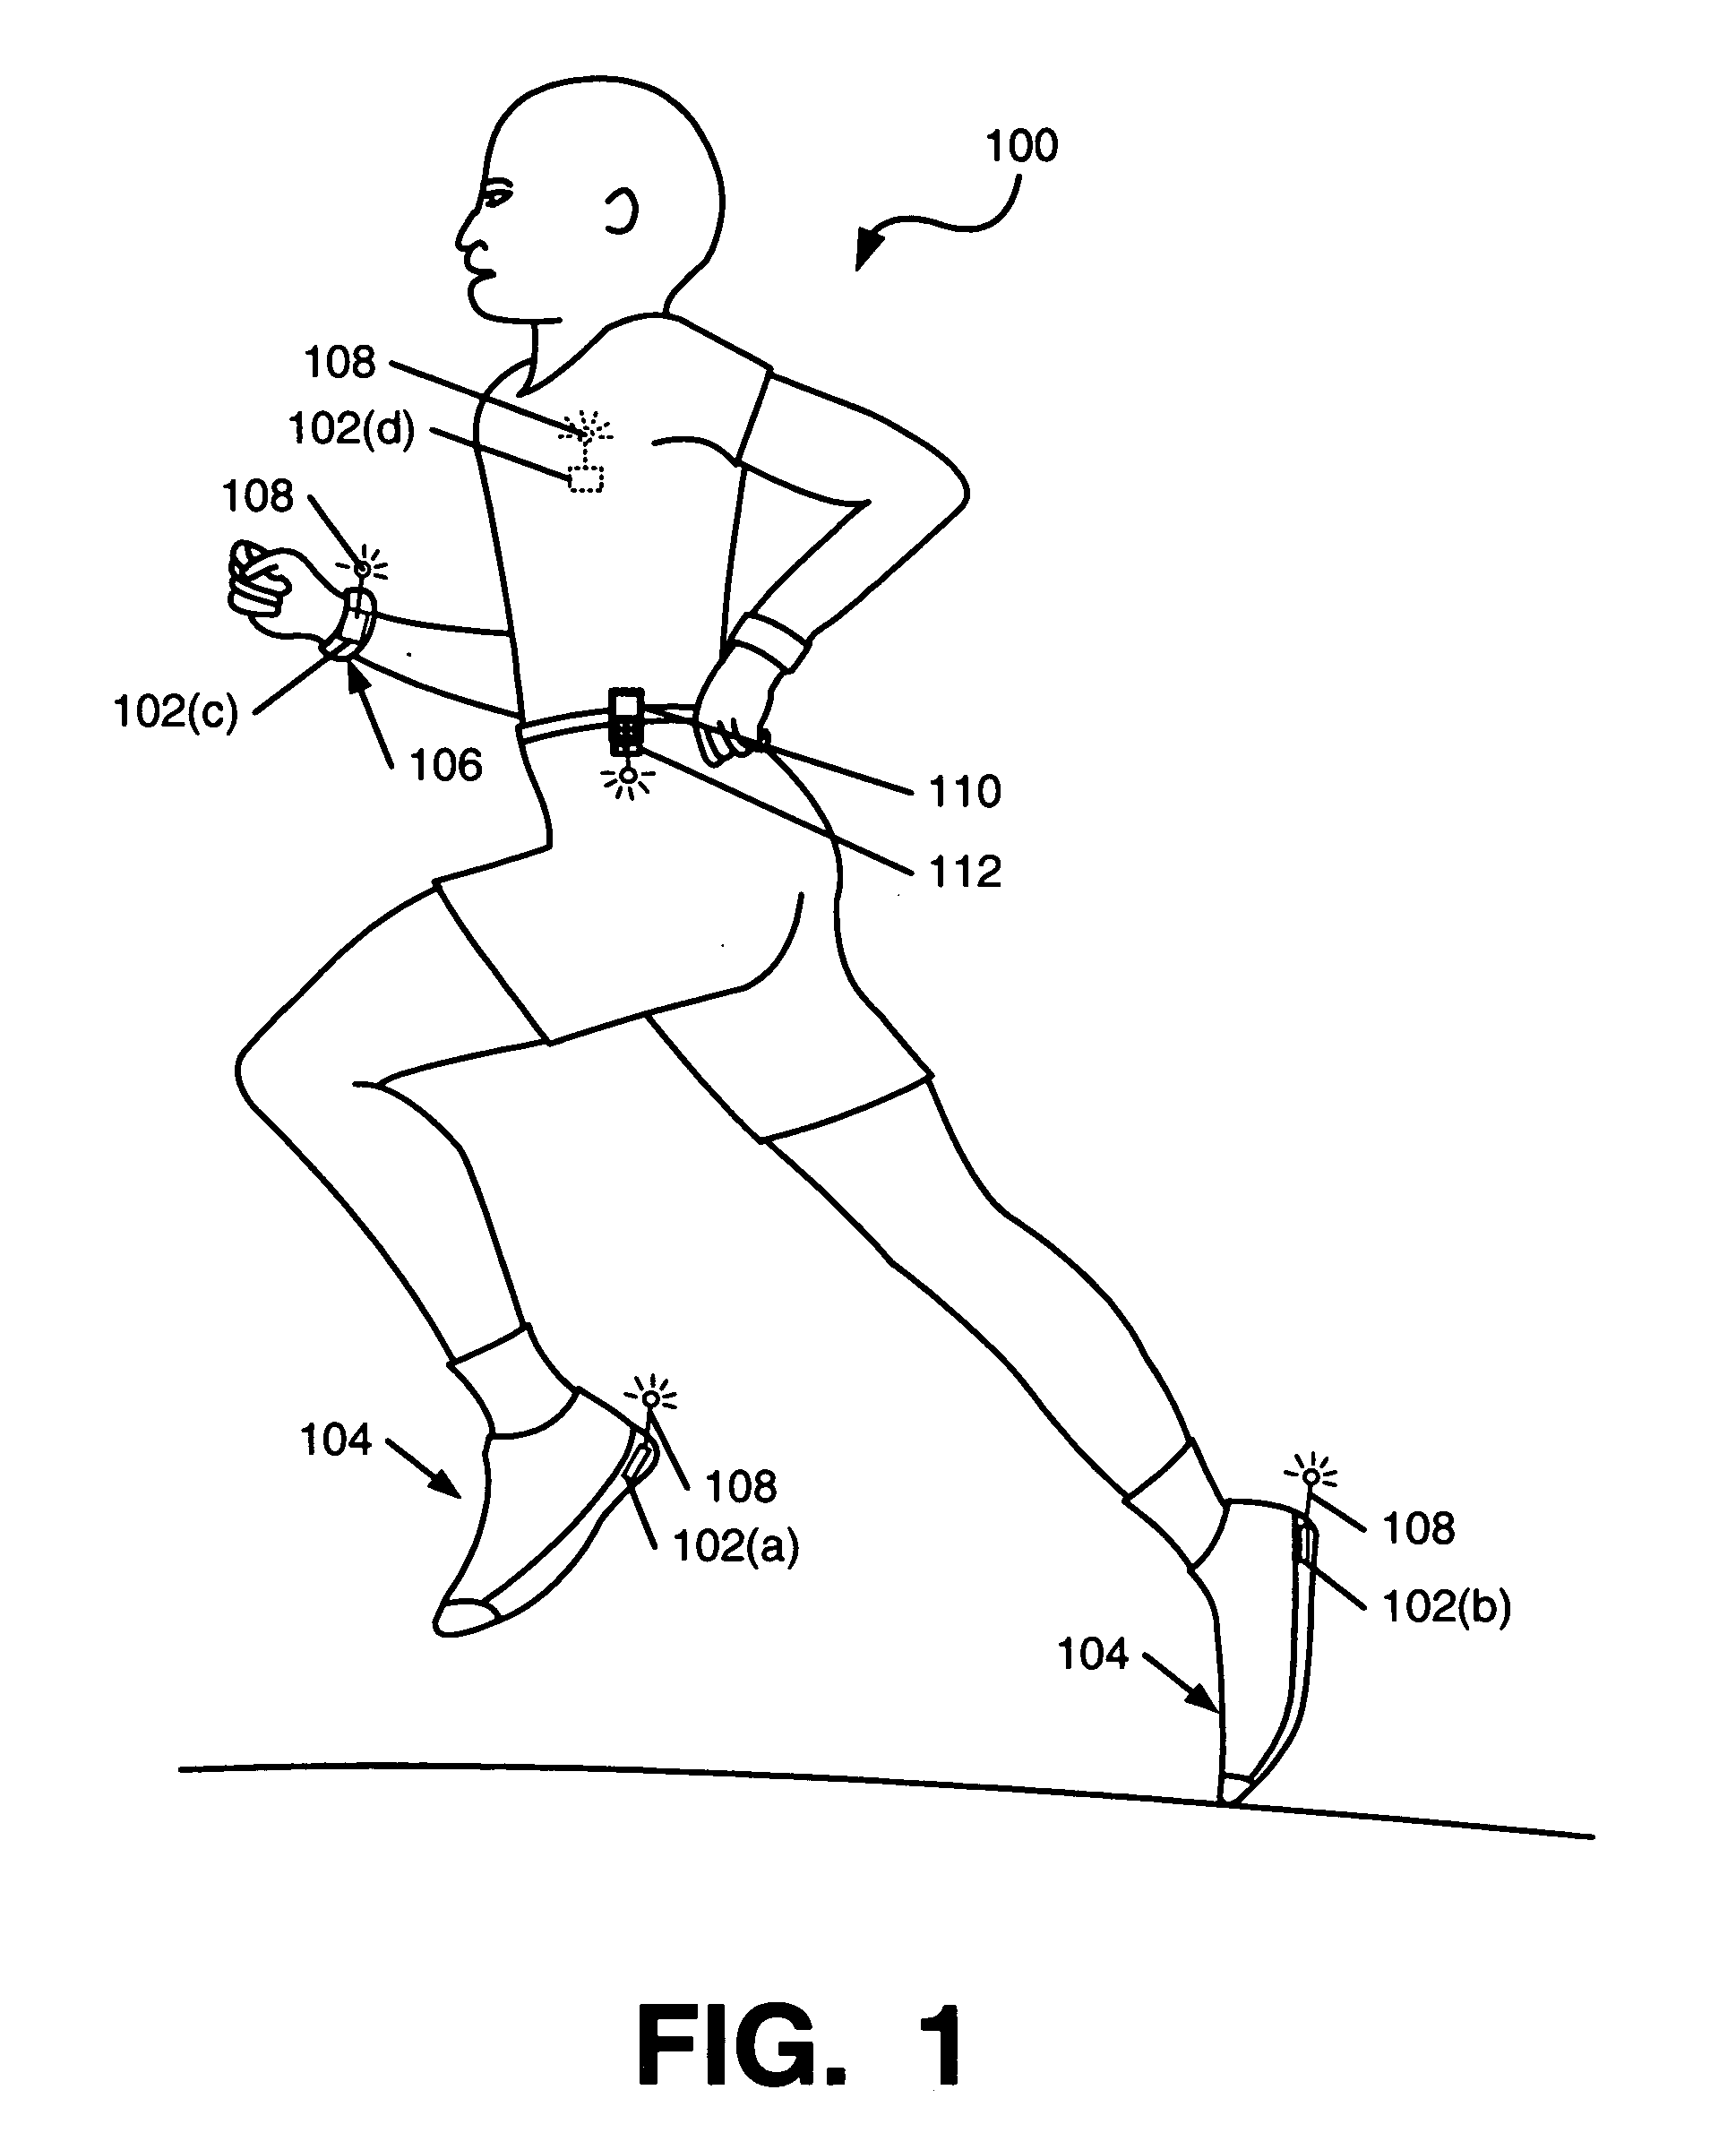 Interfaces and systems for displaying athletic performance information on electronic devices